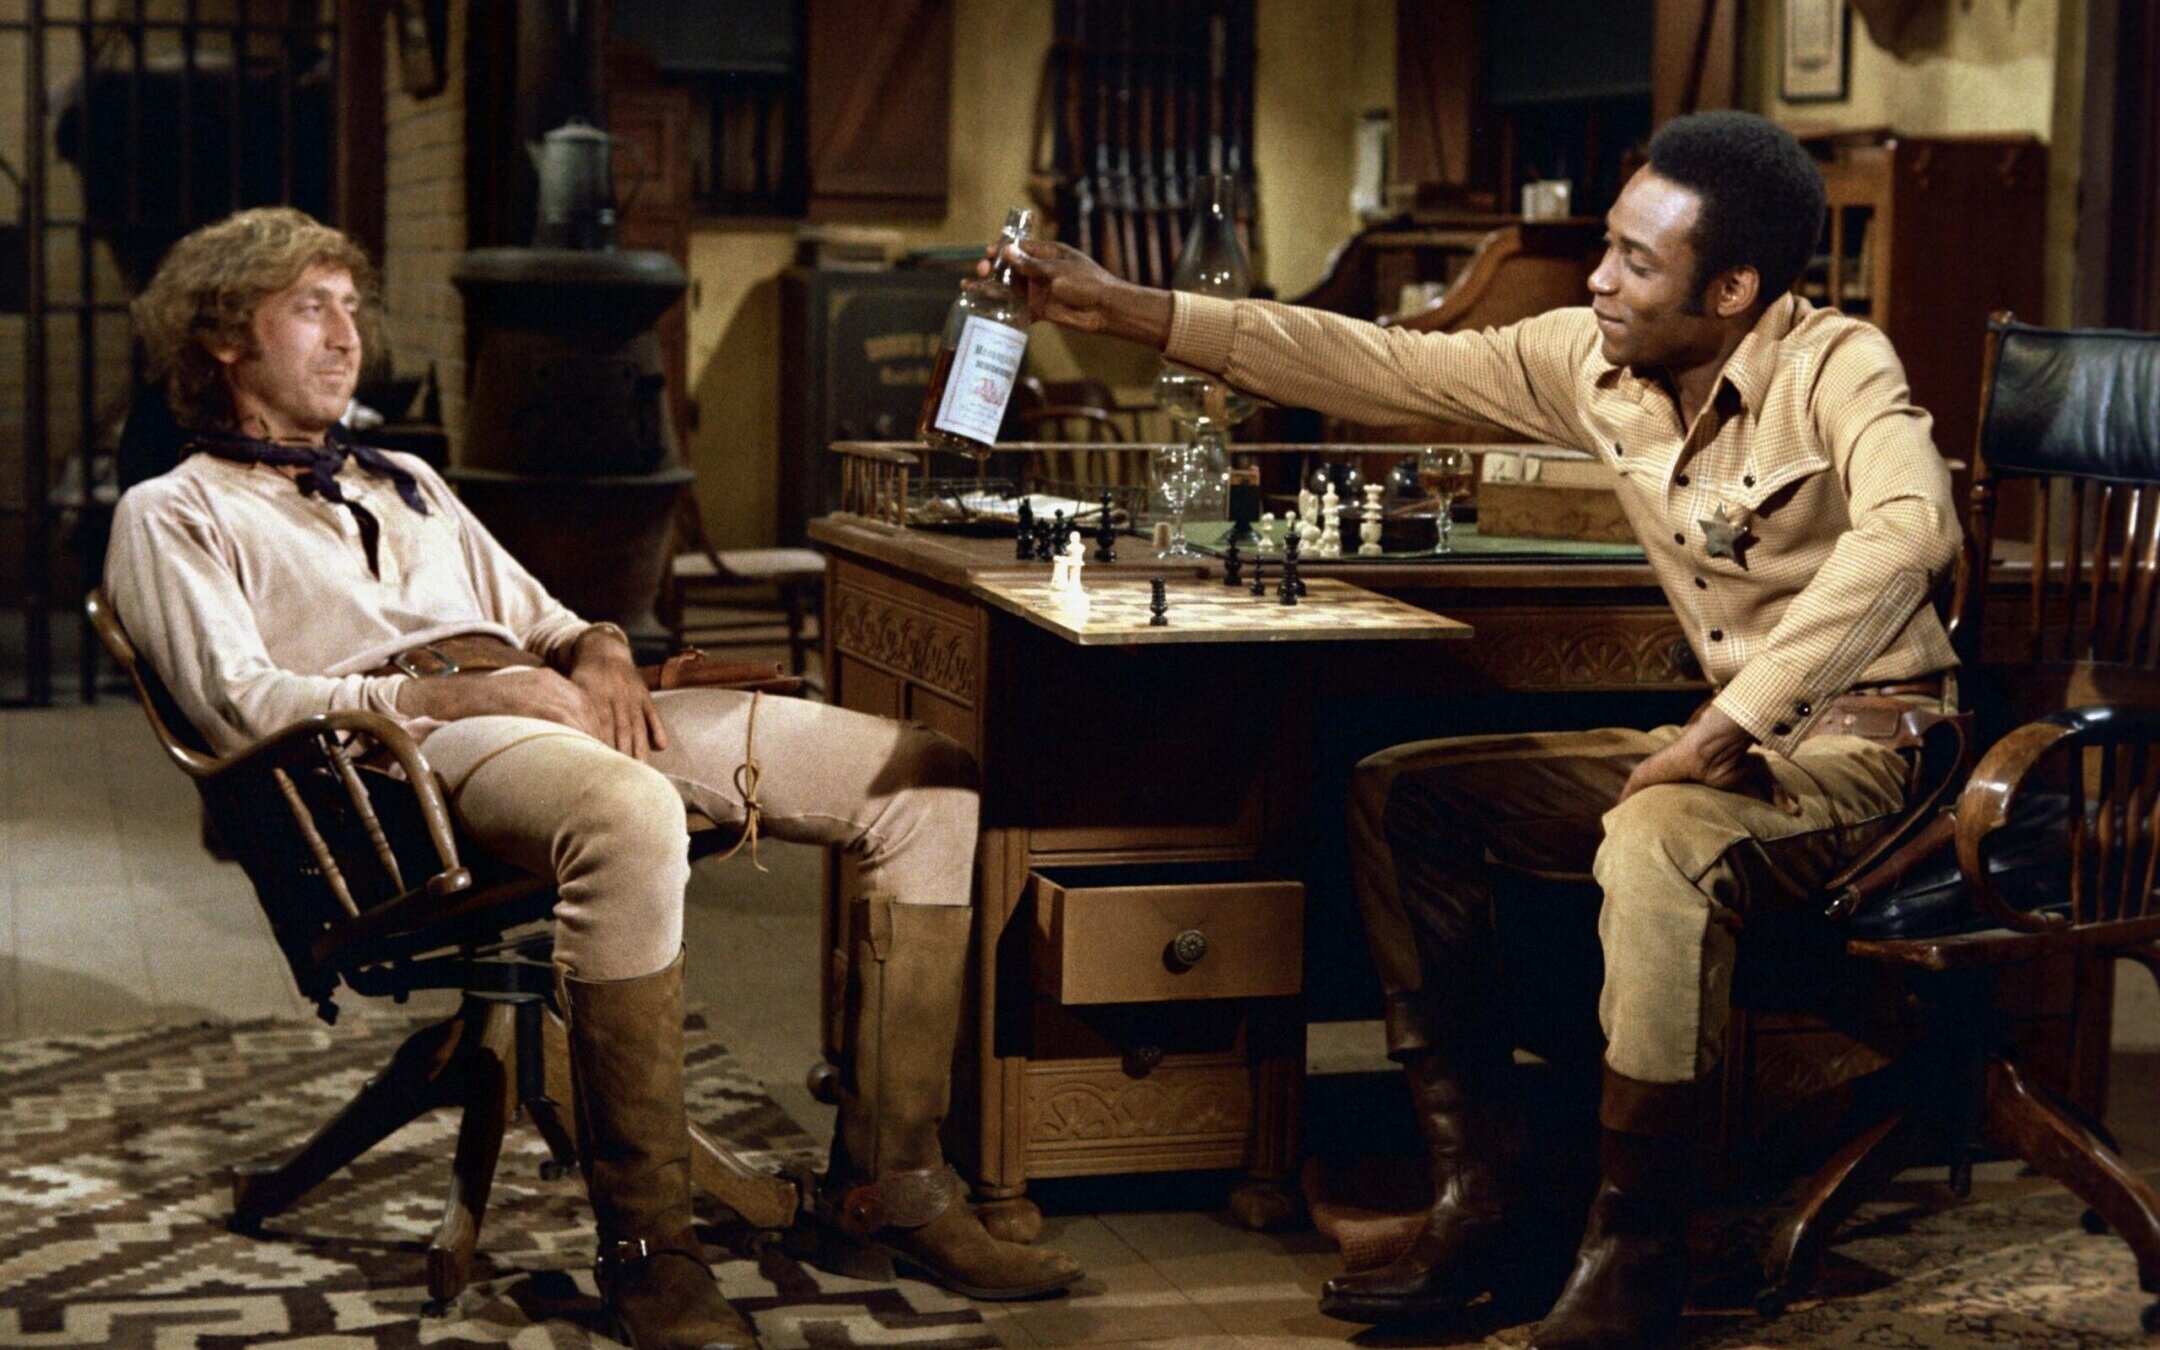 Gene Wilder and Cleavon Little appear in a scene from 1974’s “Blazing Saddles.” (Courtesy Fathom)